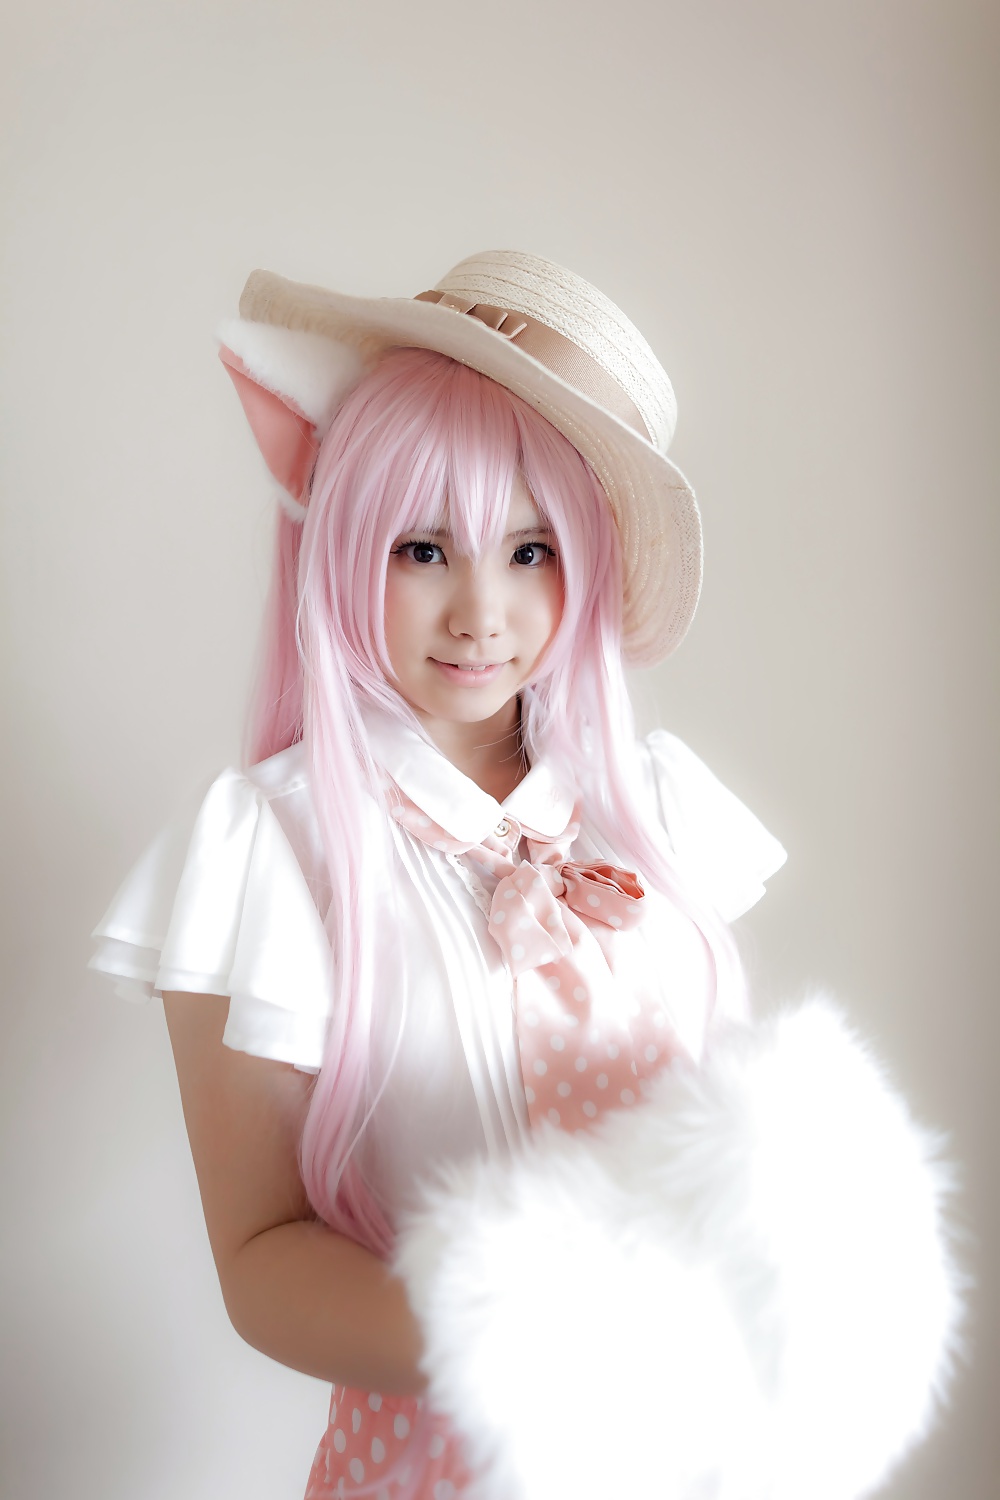 Asiatica cosplay in bianco
 #26559053